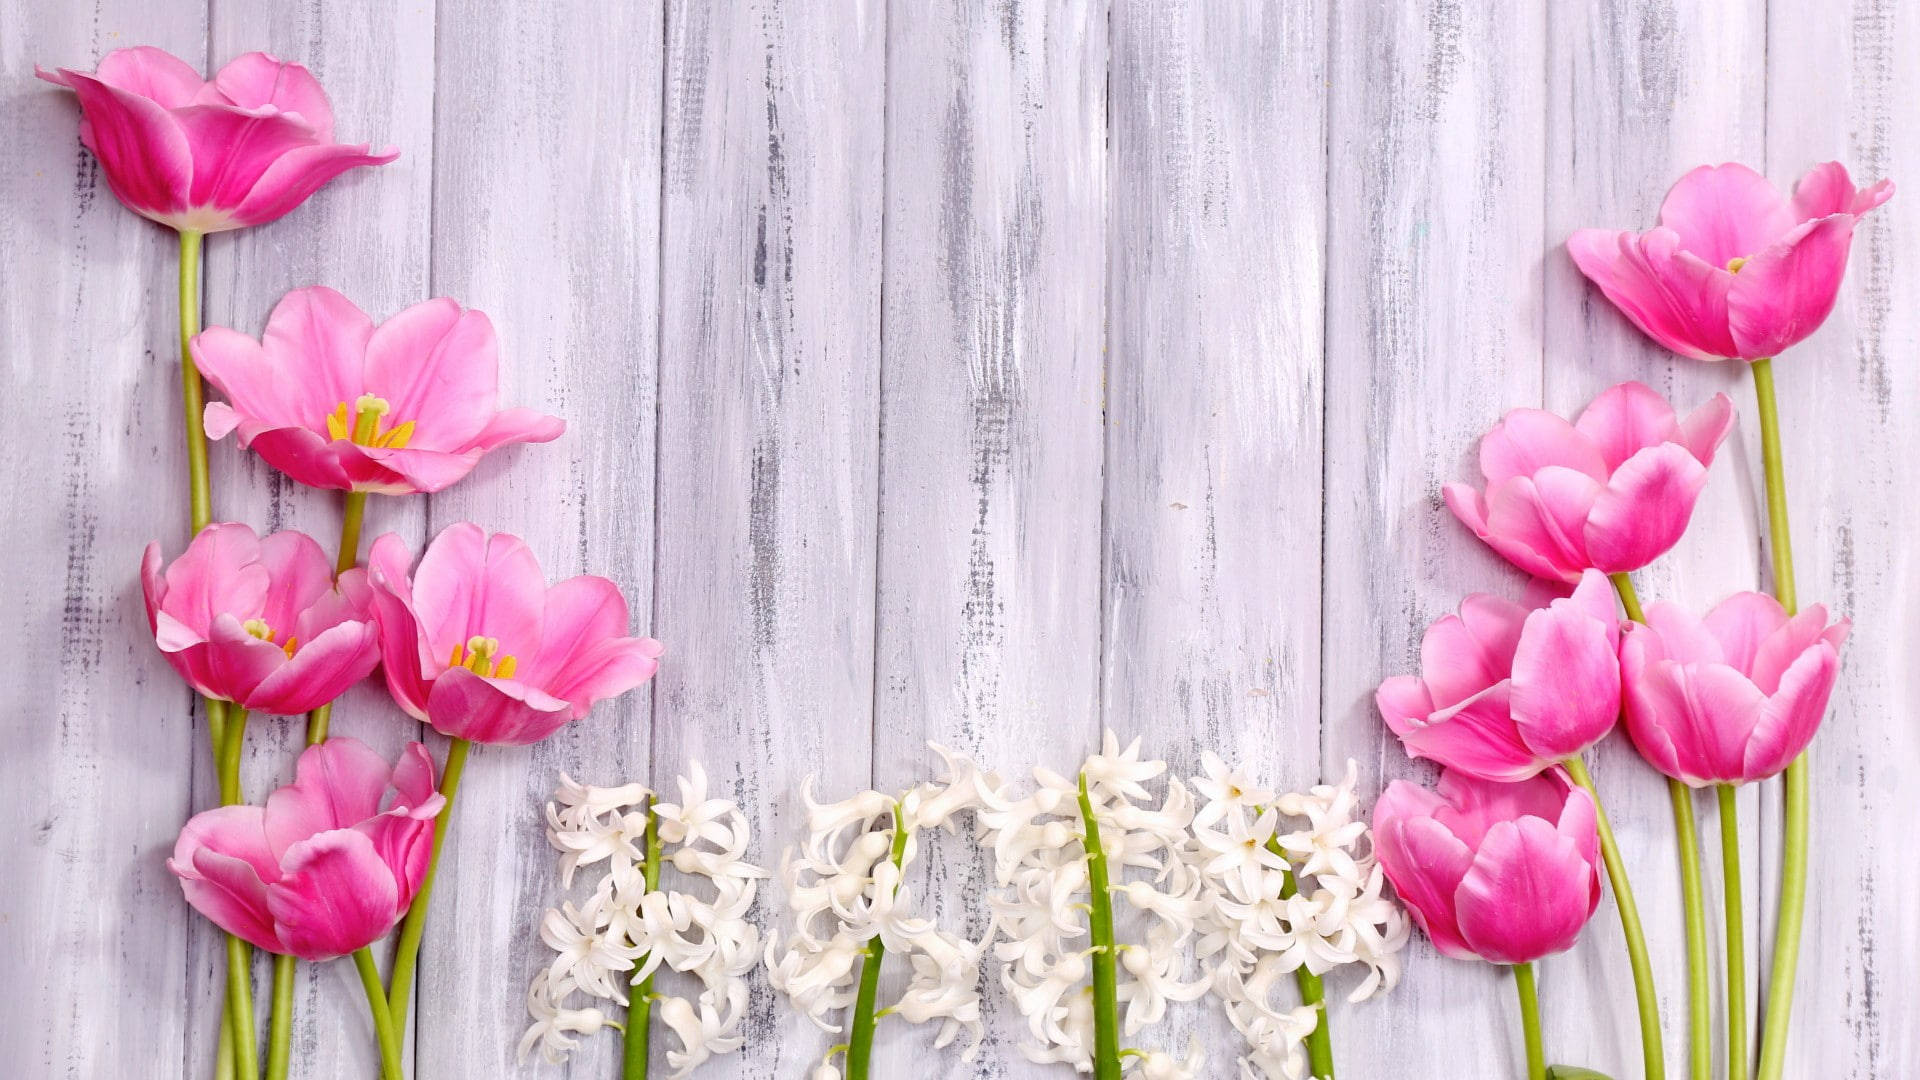 Background Design With Flowers Wallpaper